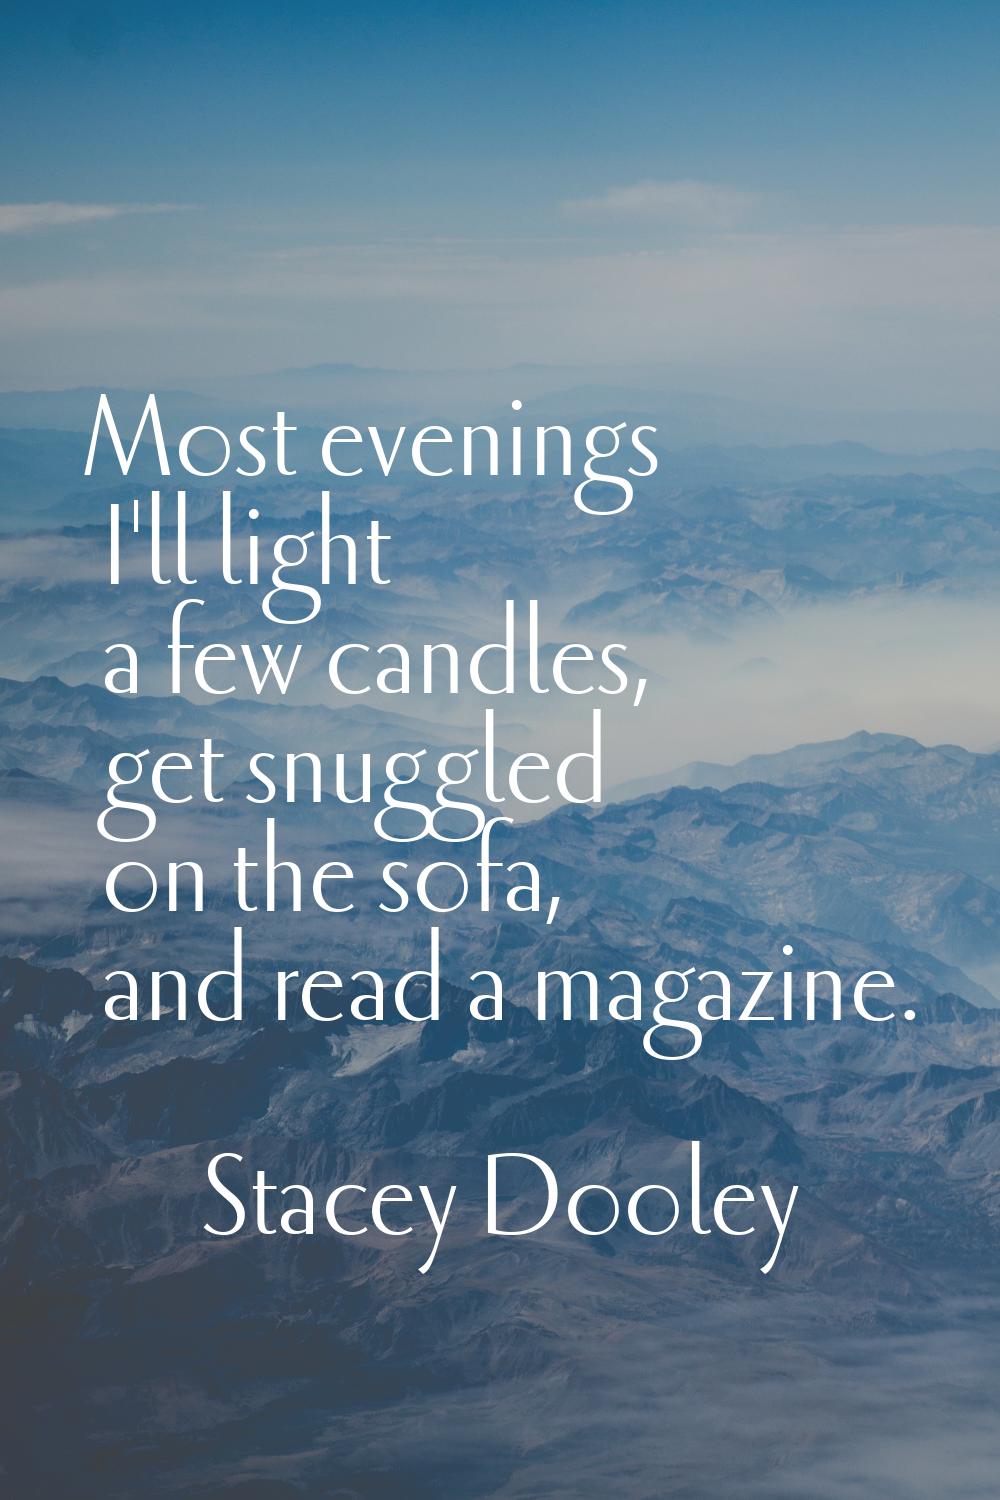 Most evenings I'll light a few candles, get snuggled on the sofa, and read a magazine.